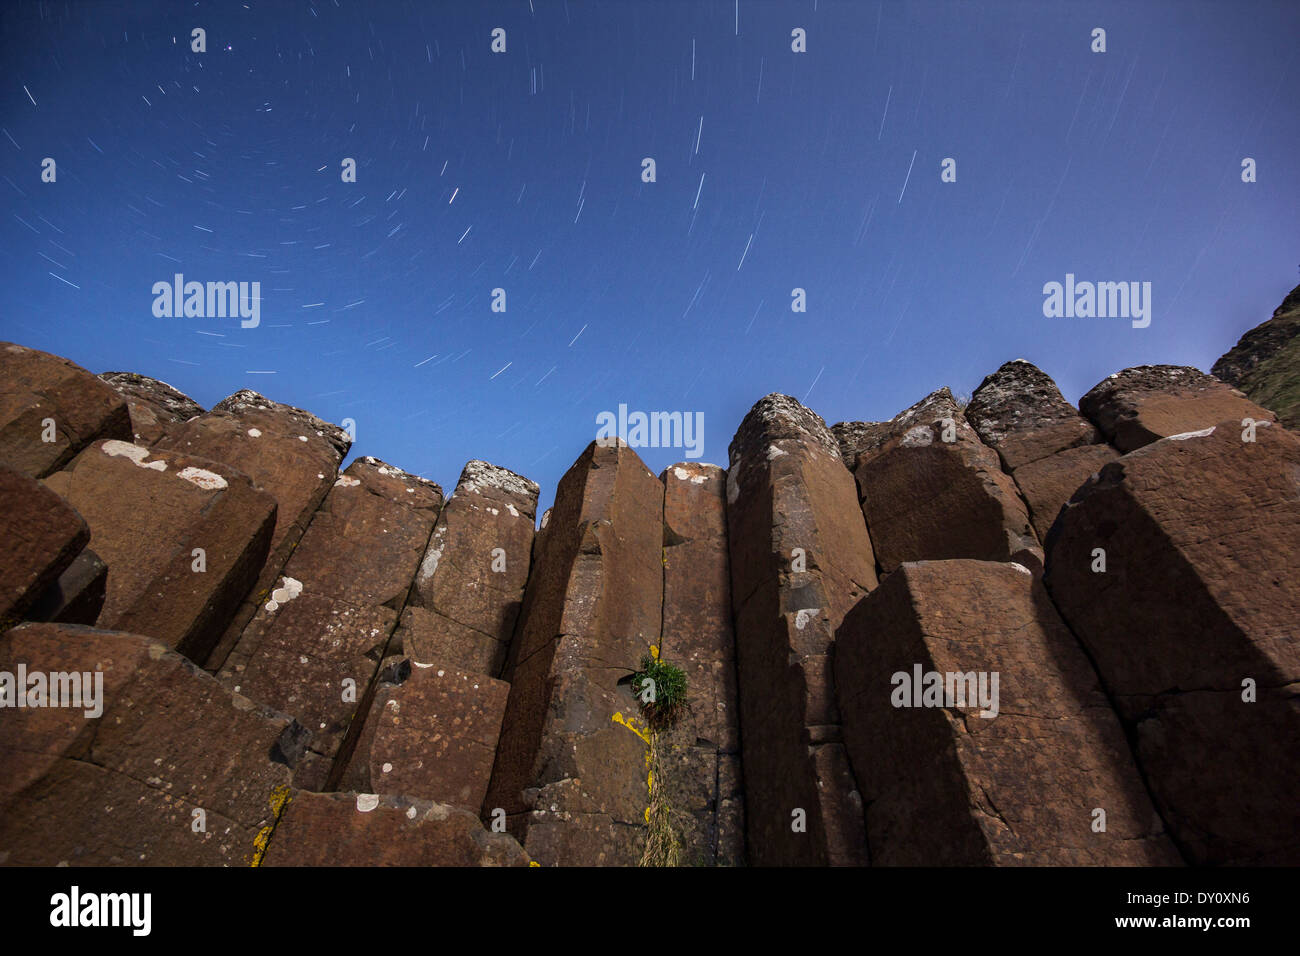 Starry night above the basalt columns at the Giant's Causeway UNESCO World Heritage site. Stock Photo